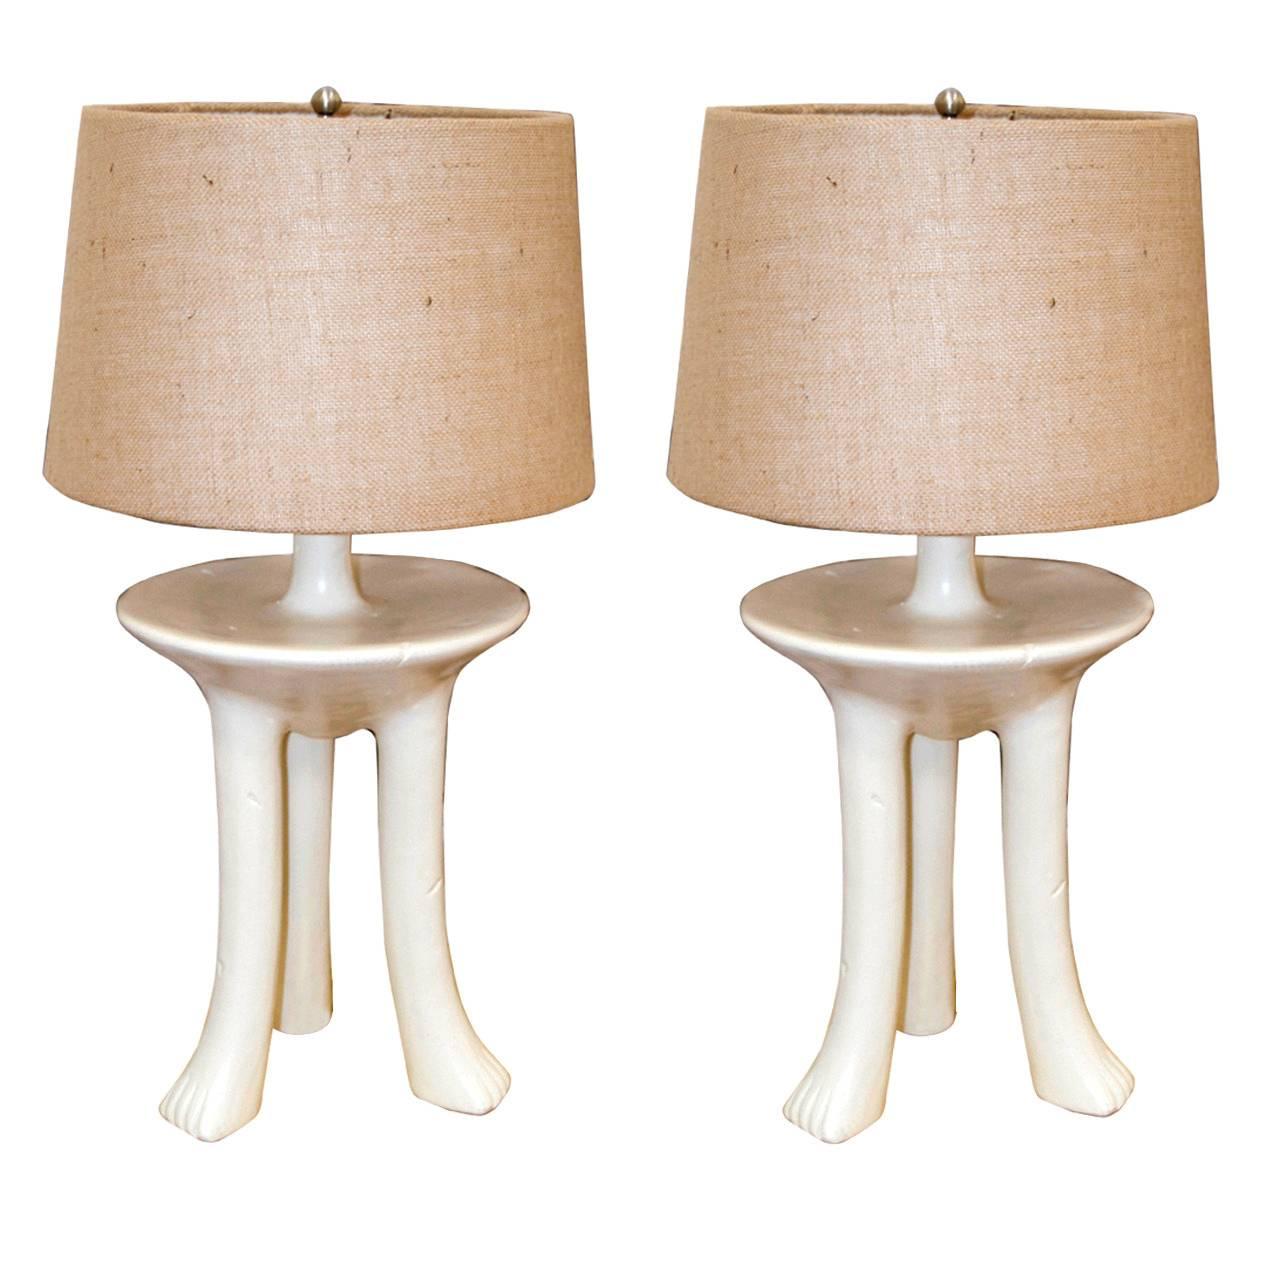 John Dickinson Pair of "Africa" Table Lamps For Sale